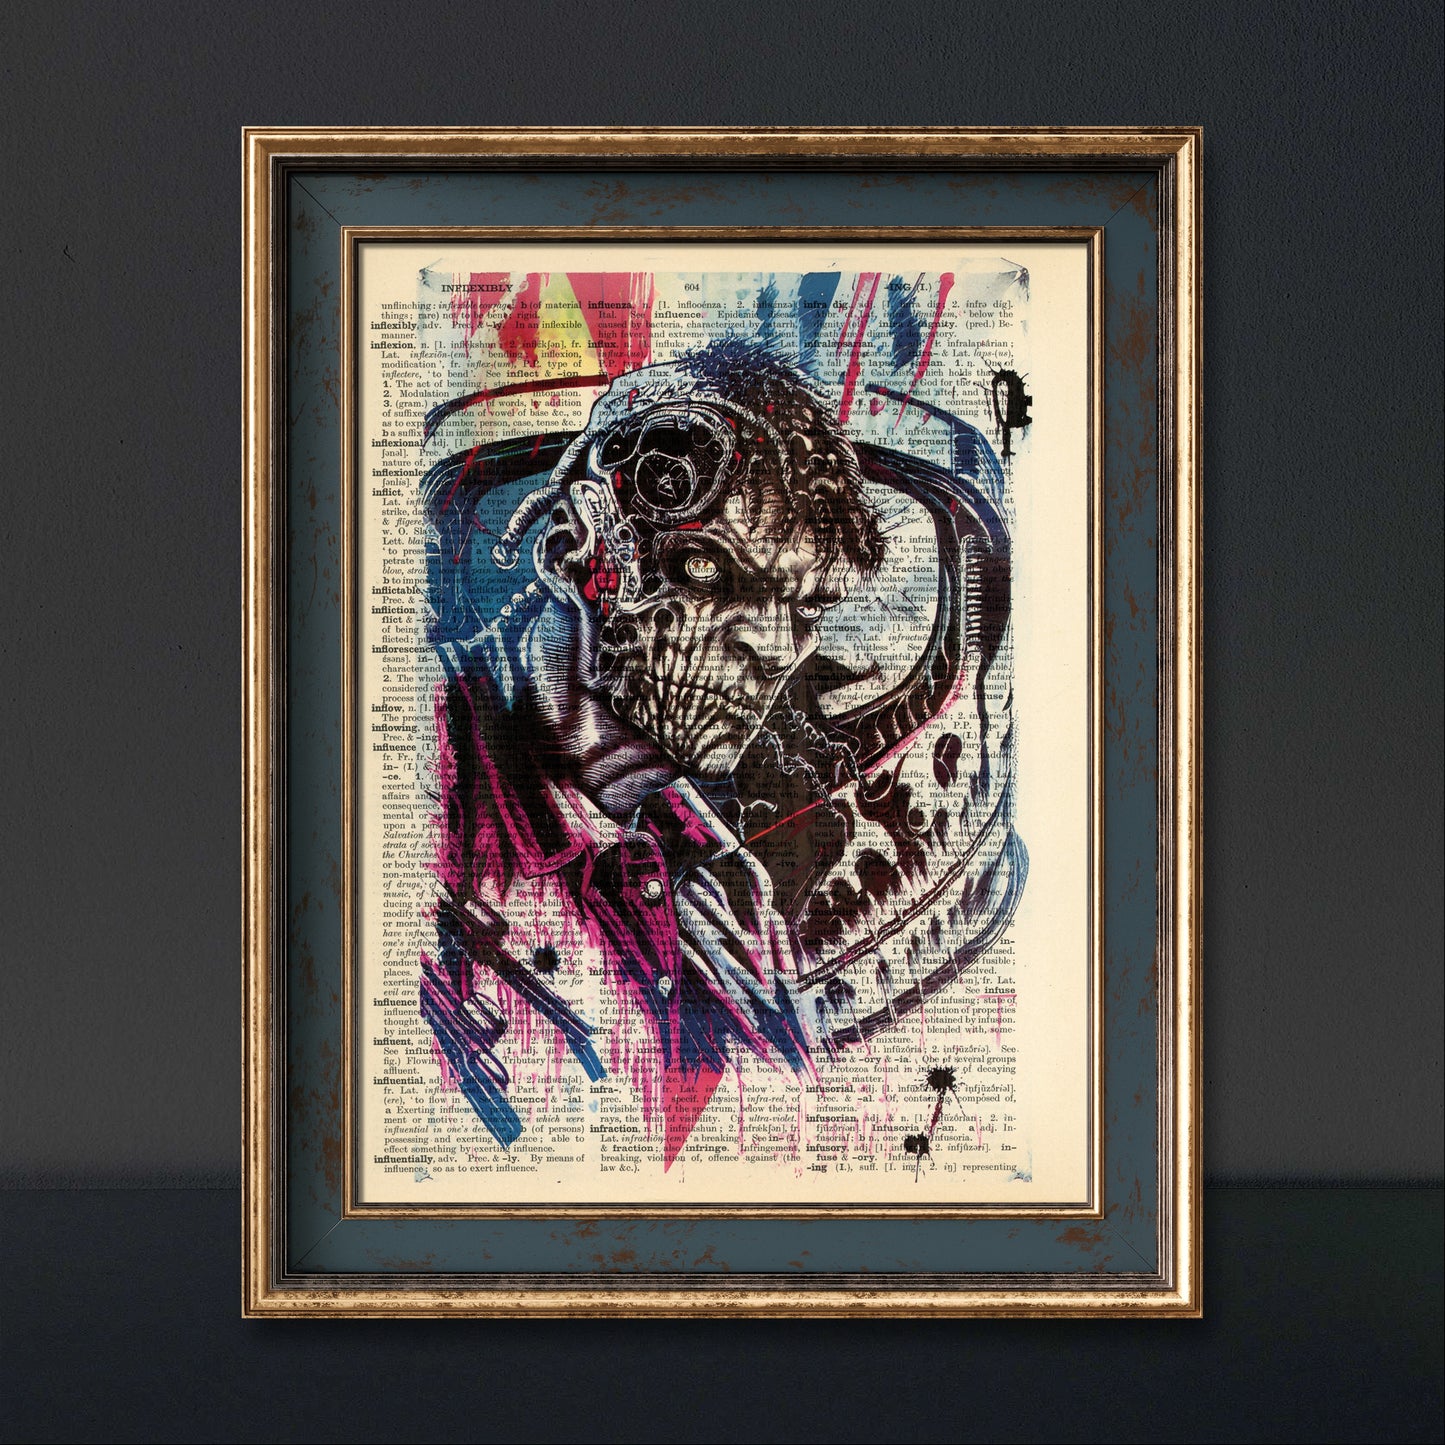 Upcycled dictionary page adds whimsical charm to the creepy artwork.